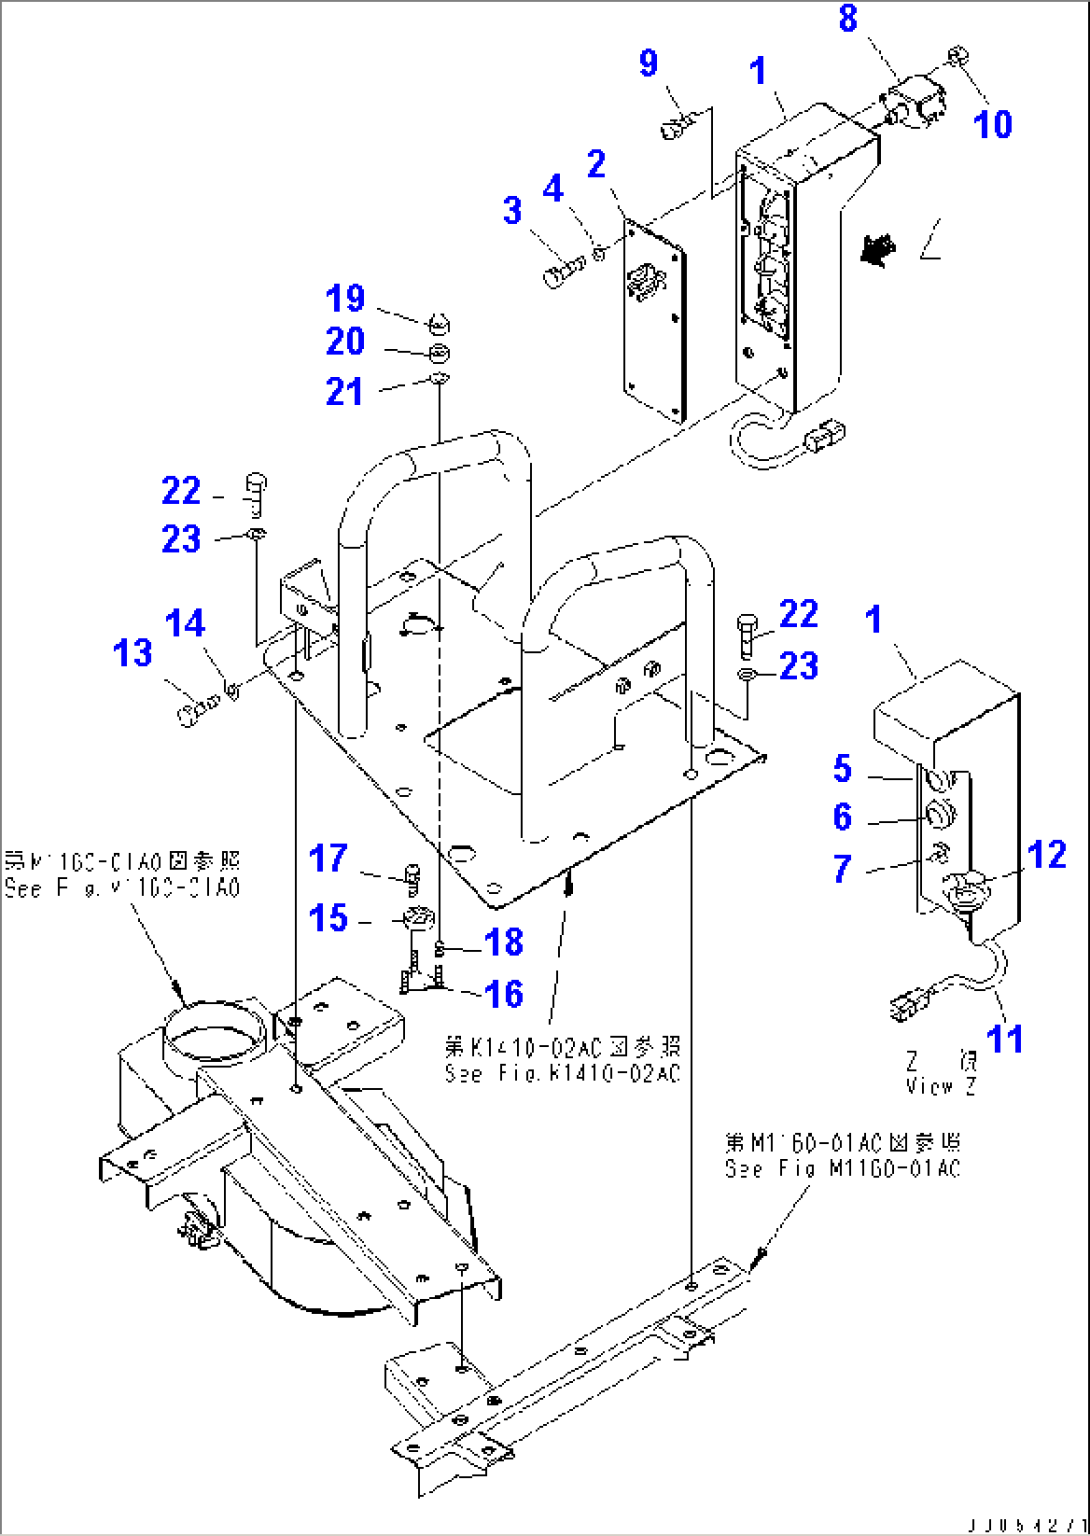 TRAVEL LEVER (SWITCH BOX AND LEVEL)(#2001-)